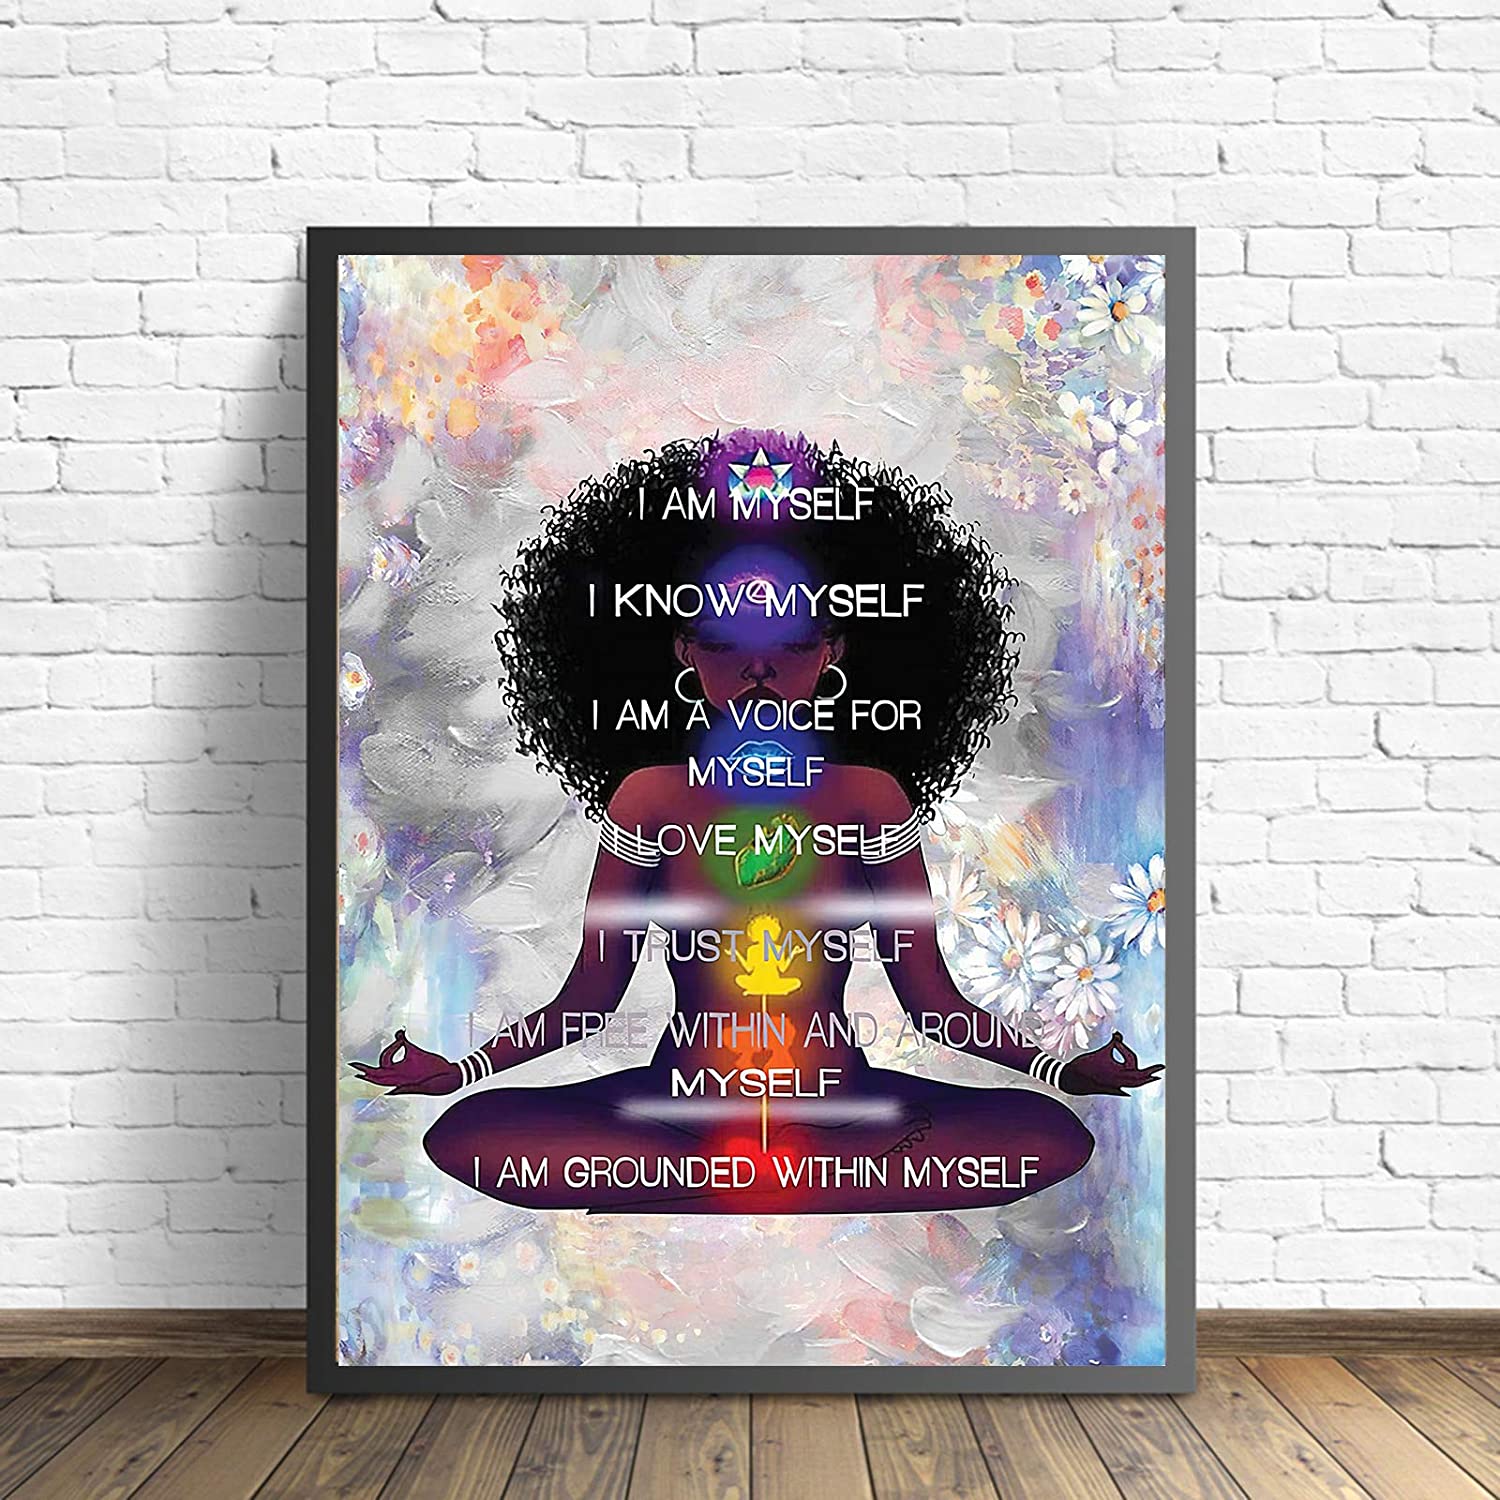 Black Girl Canvas, Black Queen Girl Wall Art Meditation Vertical Poster African American Portrait Canvas Wall Art Abstract Contemporary Matte Prints Painting Home Decor